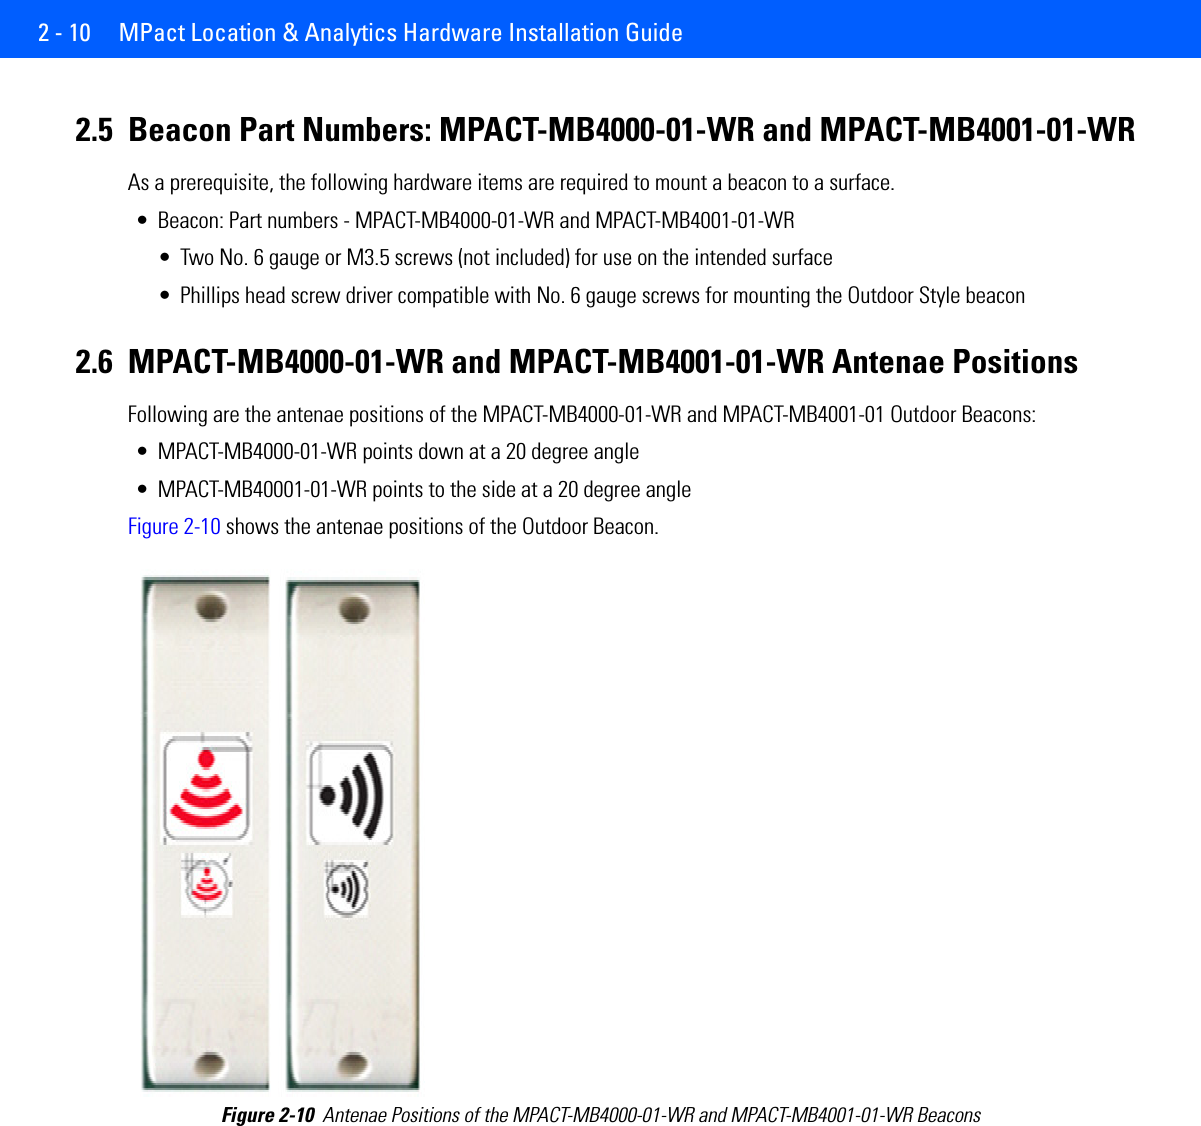 2 - 10  MPact Location &amp; Analytics Hardware Installation Guide2.5 Beacon Part Numbers: MPACT-MB4000-01-WR and MPACT-MB4001-01-WRAs a prerequisite, the following hardware items are required to mount a beacon to a surface.• Beacon: Part numbers - MPACT-MB4000-01-WR and MPACT-MB4001-01-WR• Two No. 6 gauge or M3.5 screws (not included) for use on the intended surface• Phillips head screw driver compatible with No. 6 gauge screws for mounting the Outdoor Style beacon2.6 MPACT-MB4000-01-WR and MPACT-MB4001-01-WR Antenae Positions Following are the antenae positions of the MPACT-MB4000-01-WR and MPACT-MB4001-01 Outdoor Beacons:• MPACT-MB4000-01-WR points down at a 20 degree angle• MPACT-MB40001-01-WR points to the side at a 20 degree angleFigure 2-10 shows the antenae positions of the Outdoor Beacon. Figure 2-10  Antenae Positions of the MPACT-MB4000-01-WR and MPACT-MB4001-01-WR Beacons